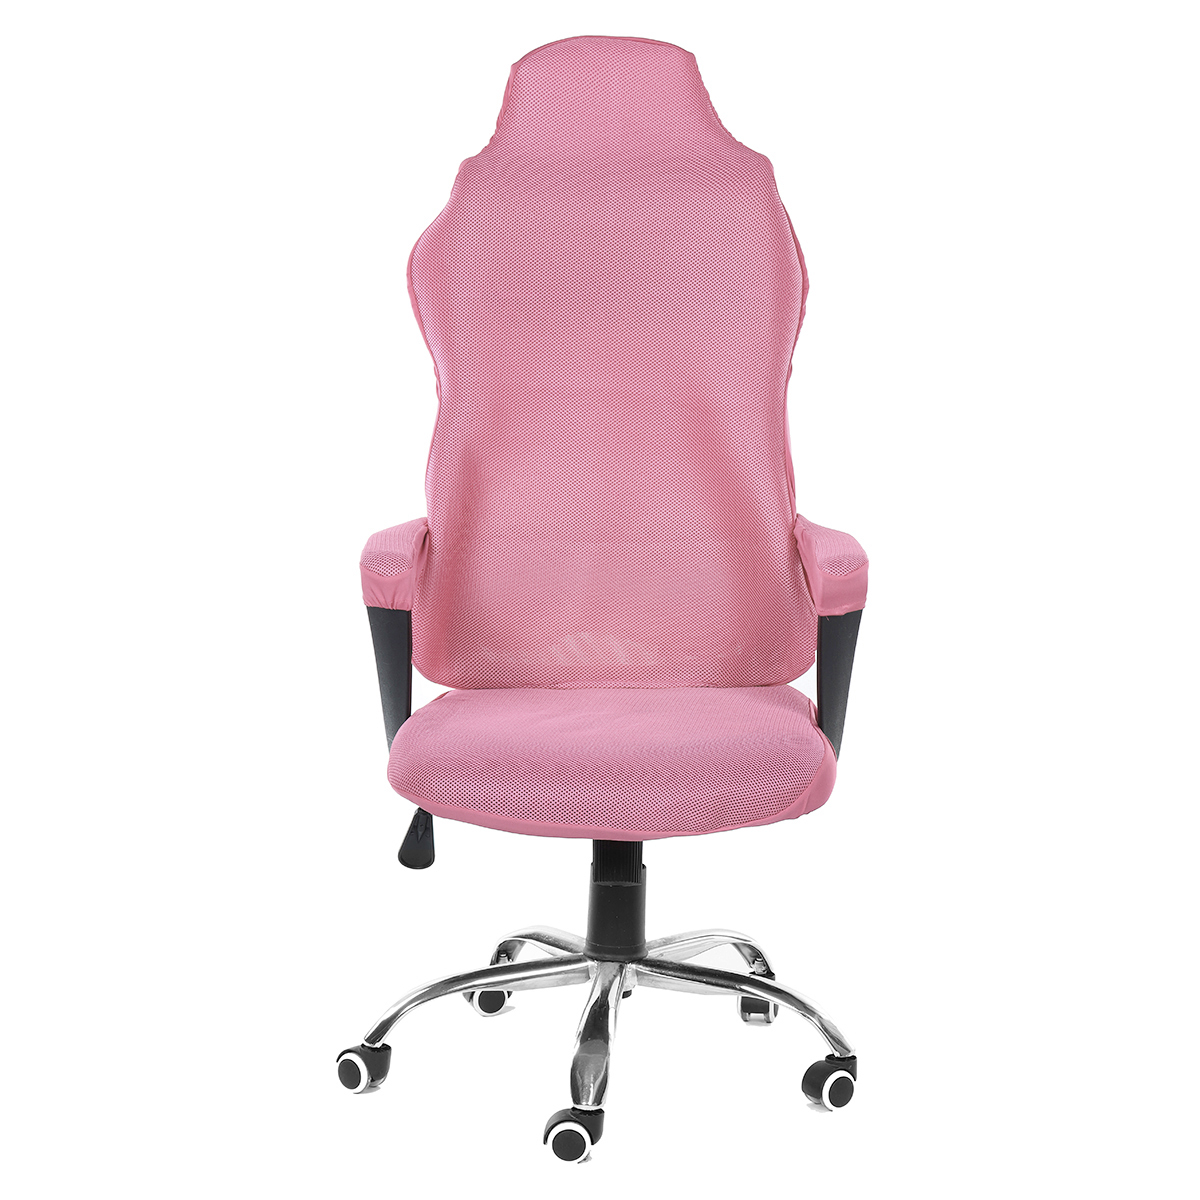 Mesh-Gaming-Chair-Elastic-Chair-Cover-Office-Chair-Dustproof-Chair-Cover-Home-Office-Solid-Color-Cha-1827333-8